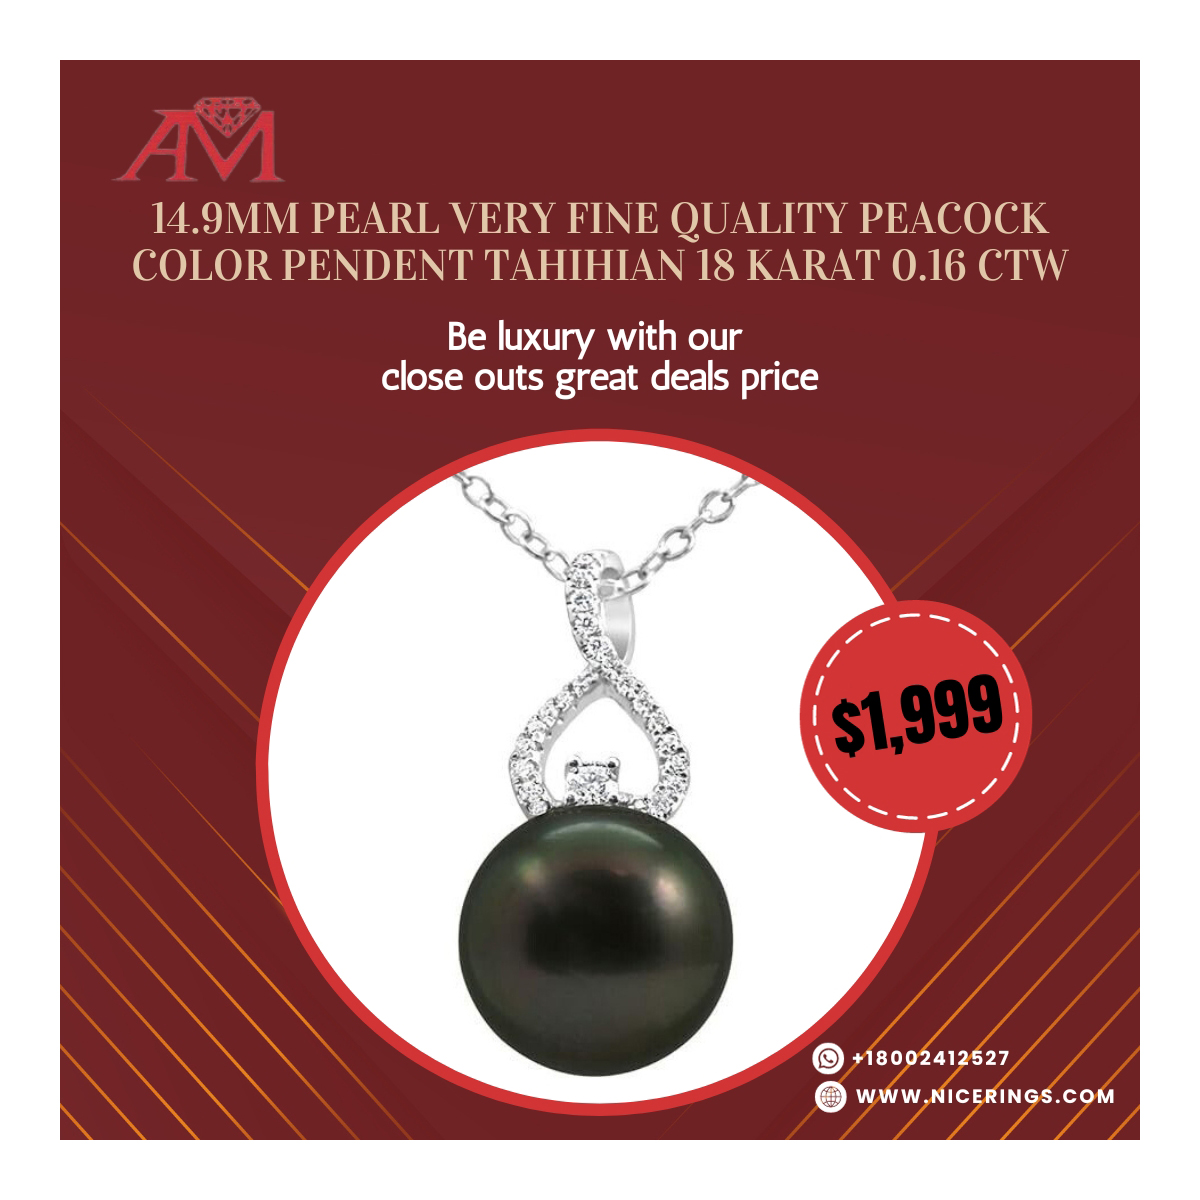 14.9mm Pearl Peacock Color Pendent TAHIHIAN 18 Karat 0.16 Ctw And It Is Available In 14k, 18k, And Platinum